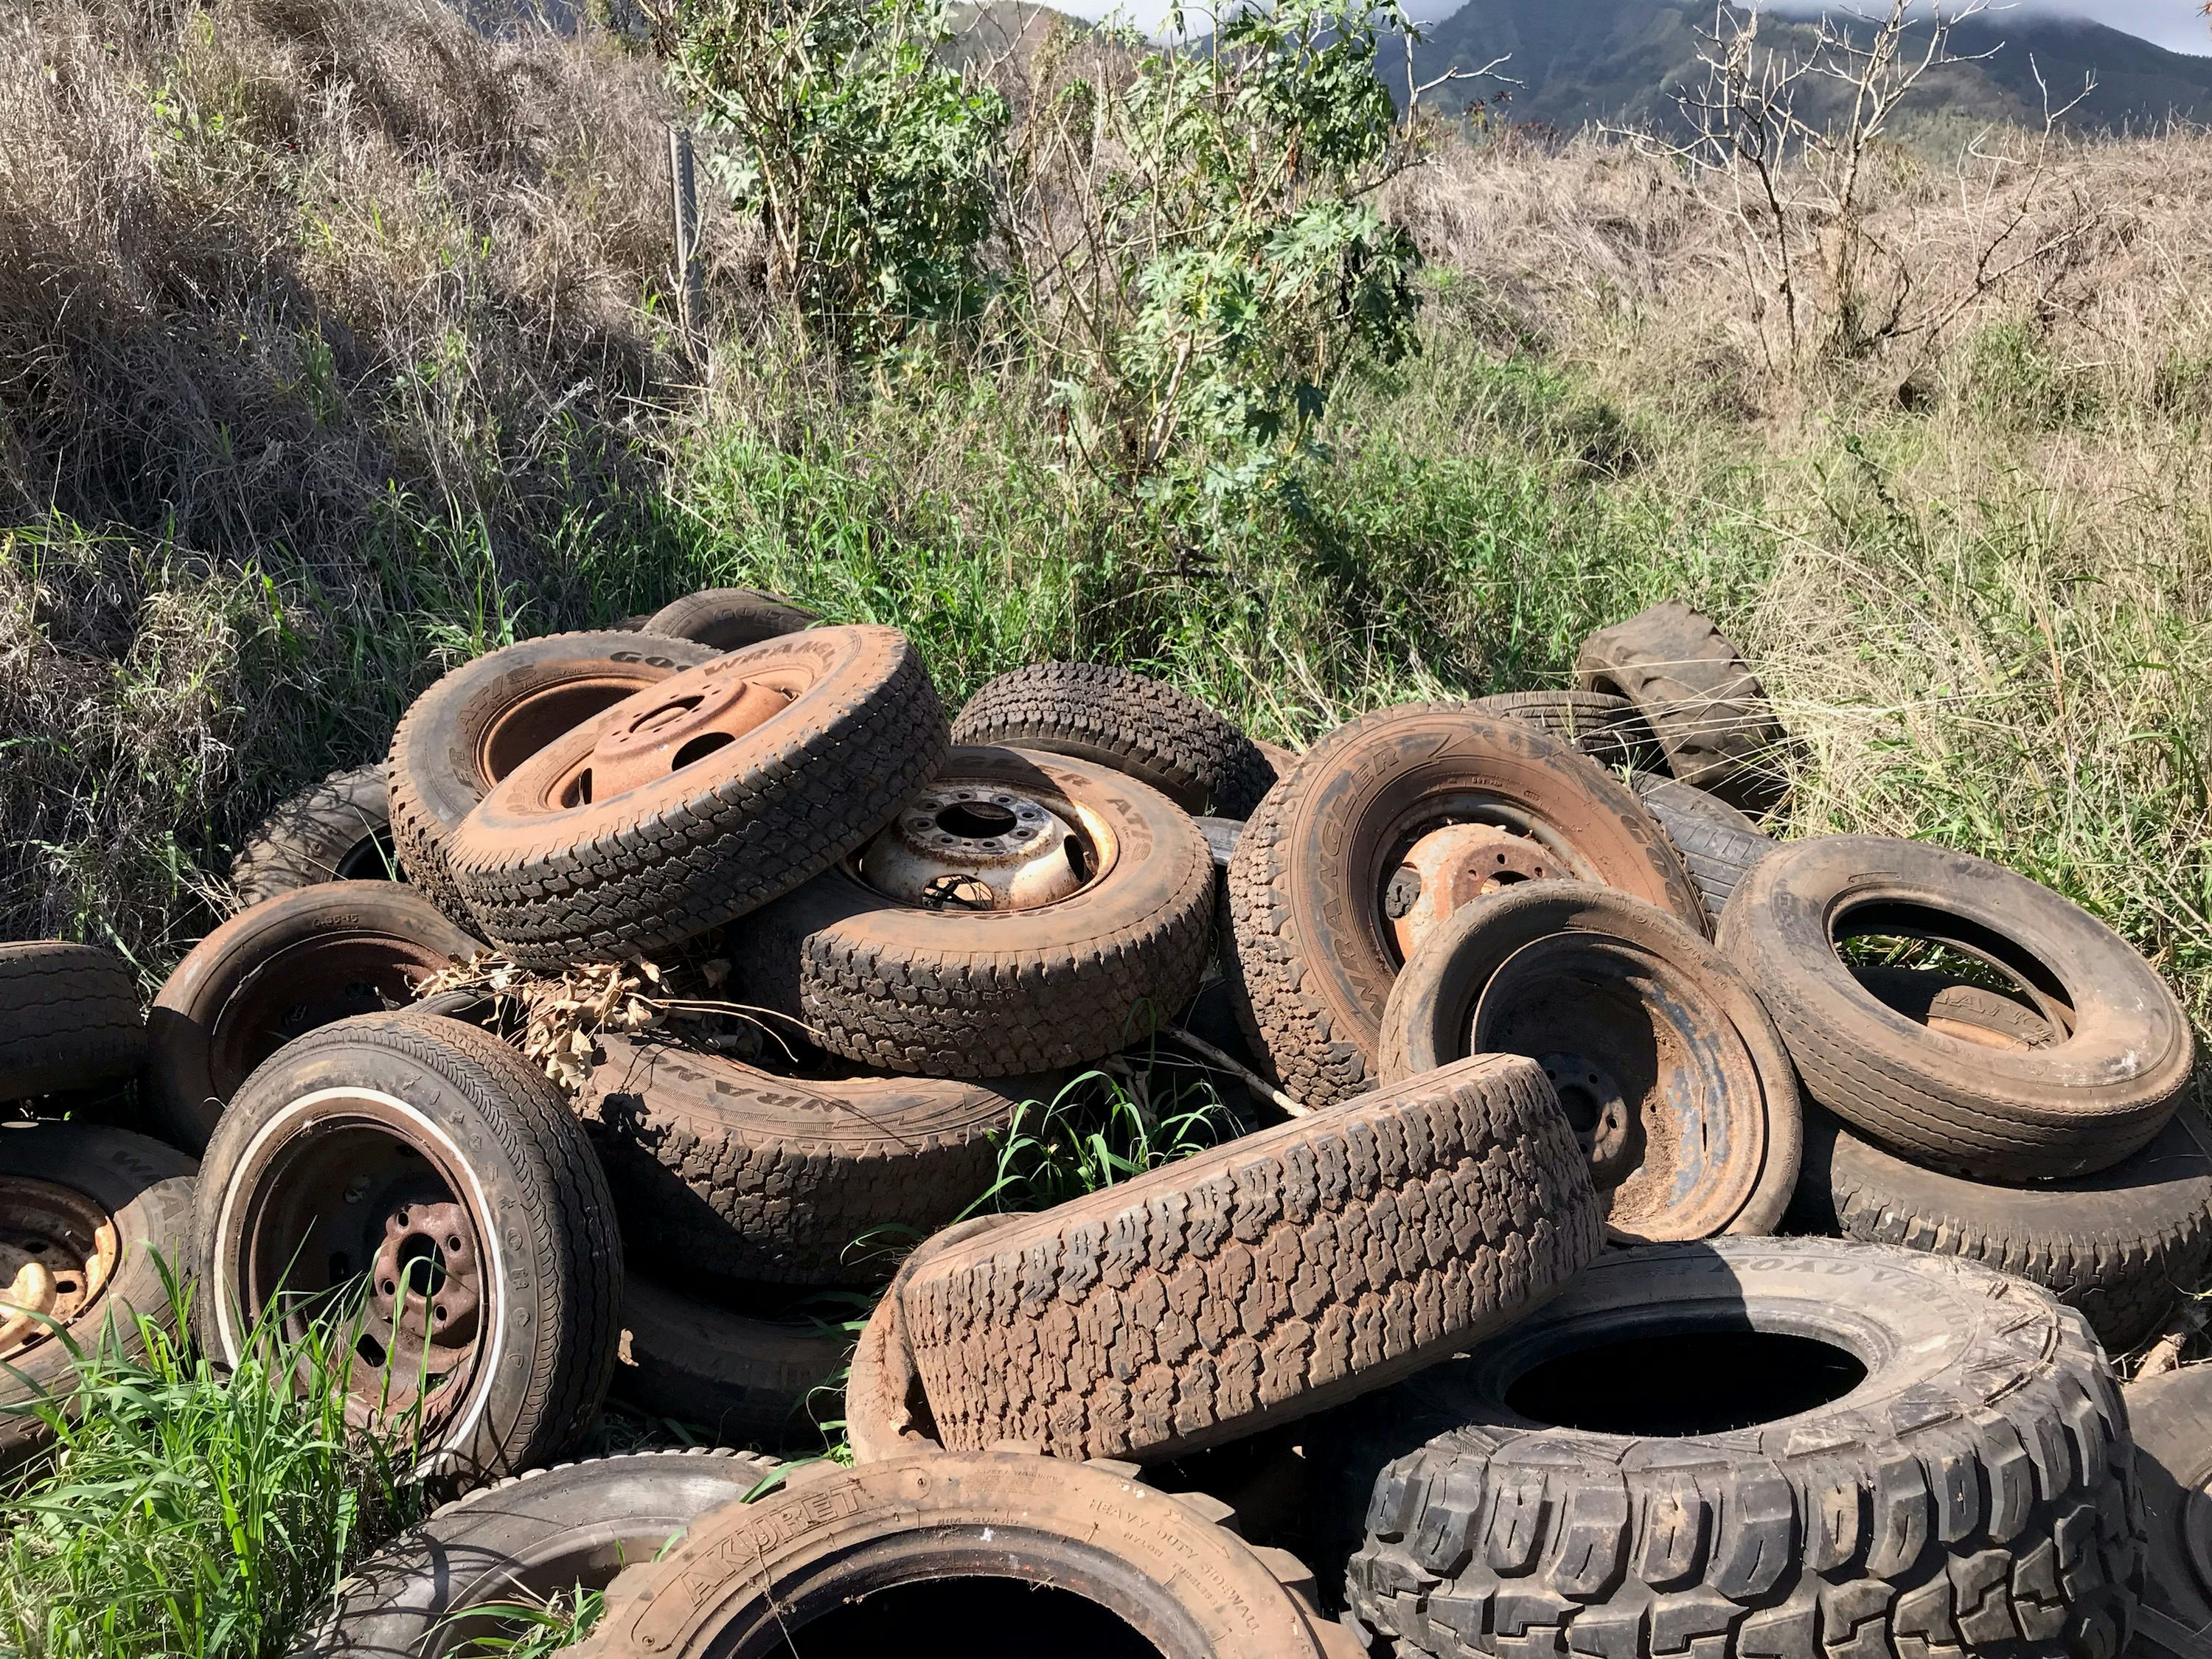 a pile of discarded tires